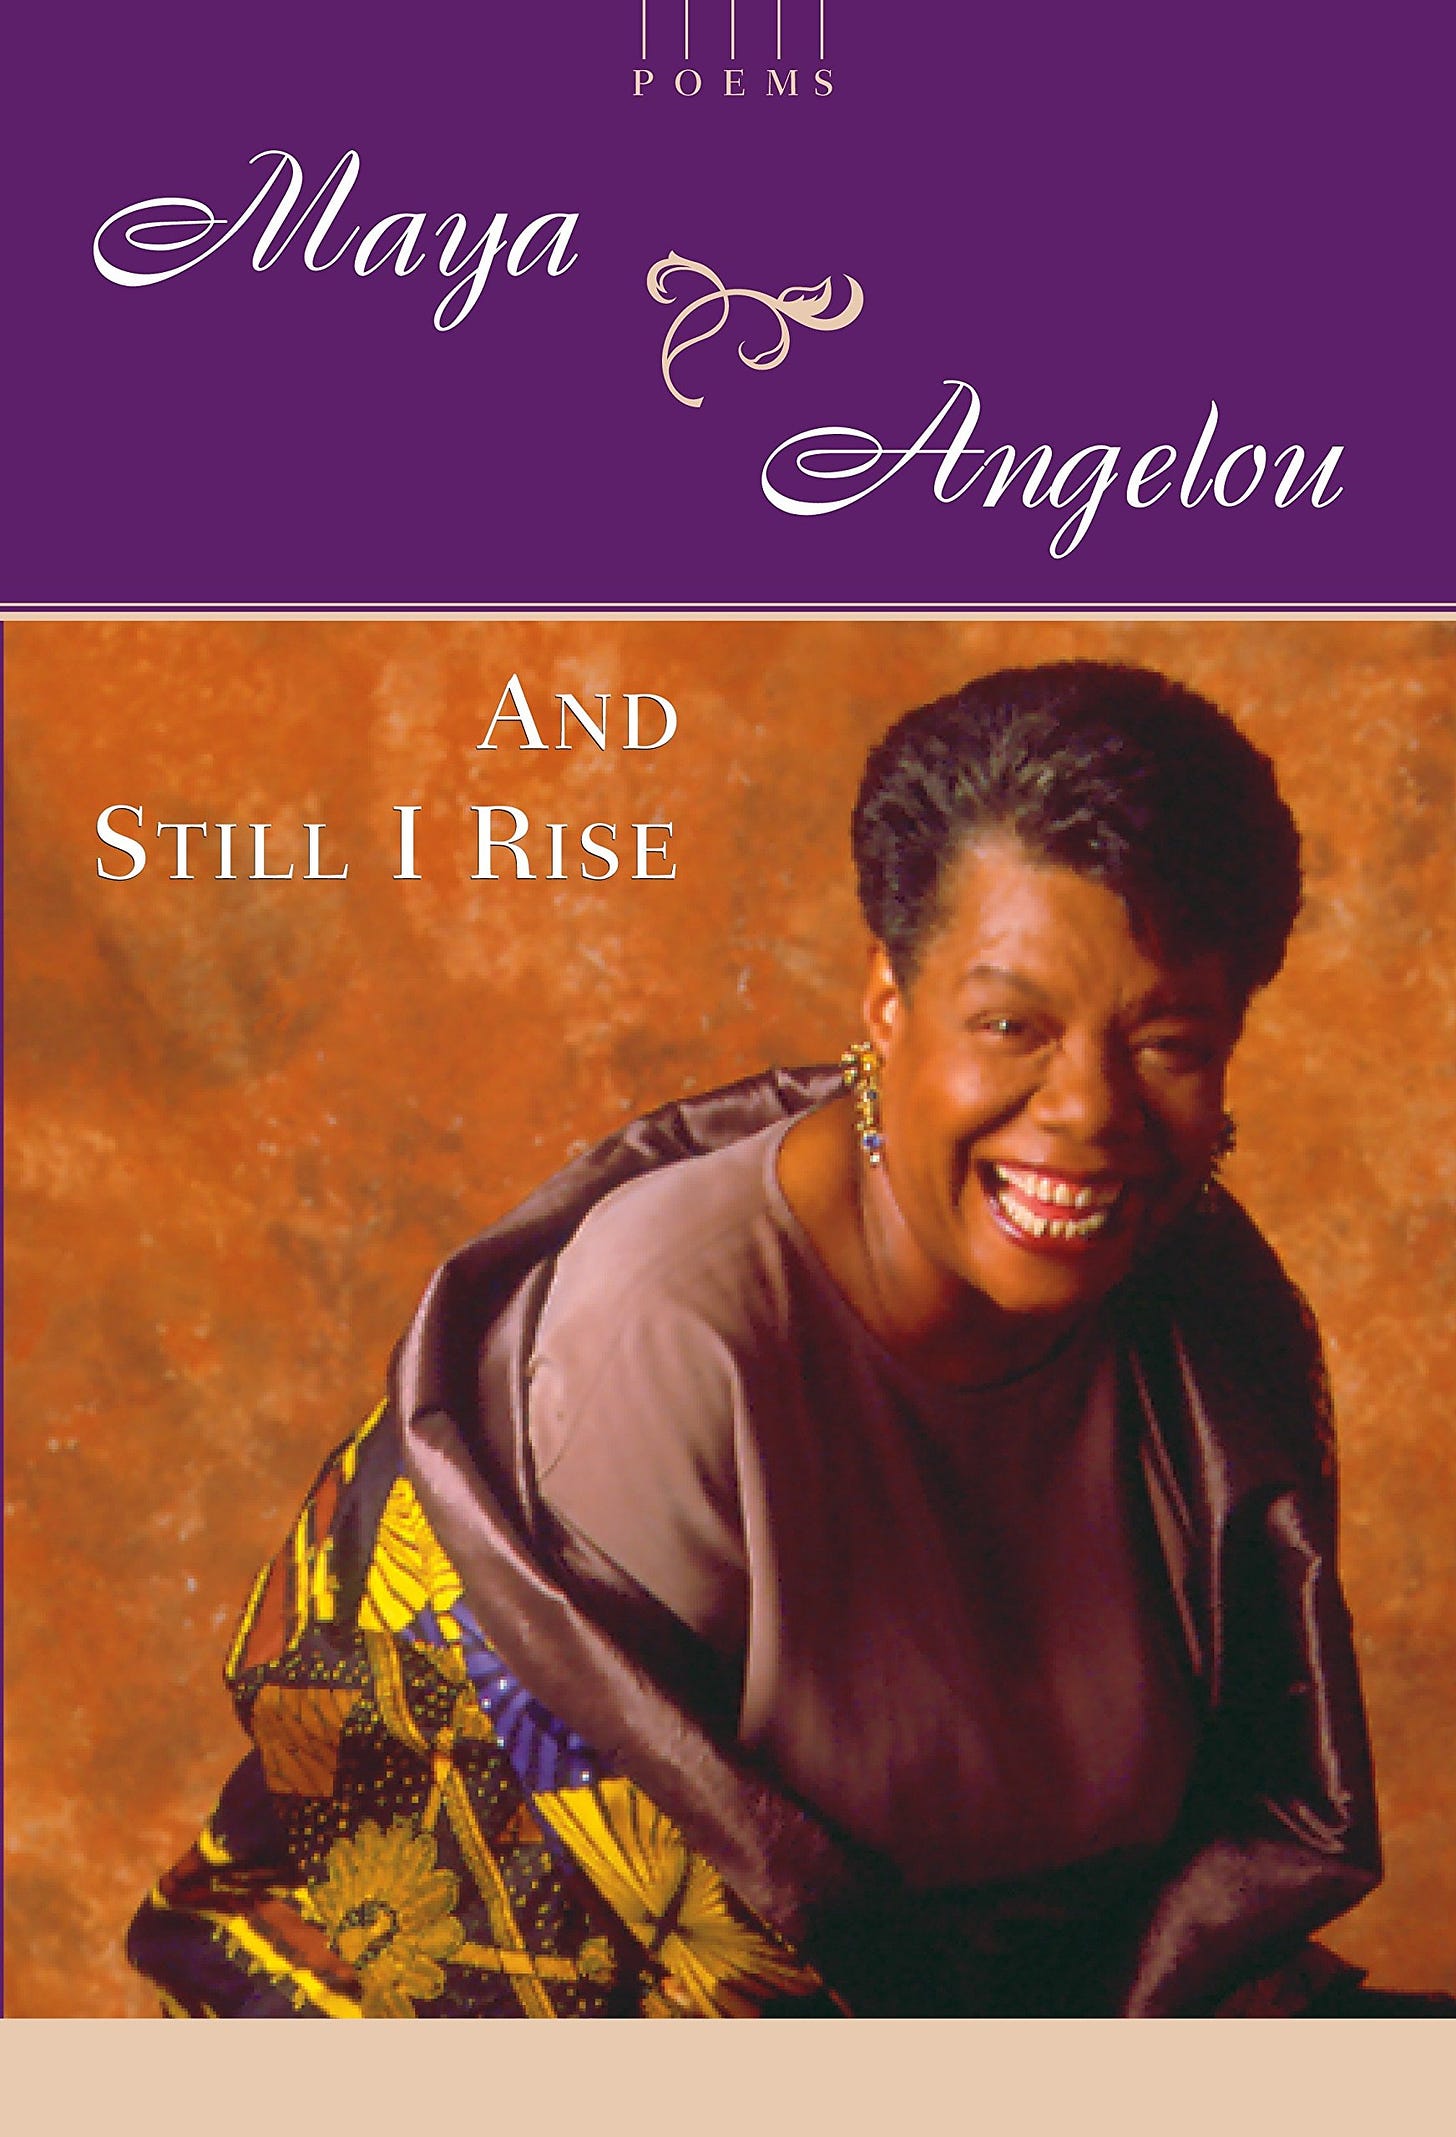 Amazon.com: And Still I Rise: A Book of Poems (9780394502526): Angelou, Maya:  Books